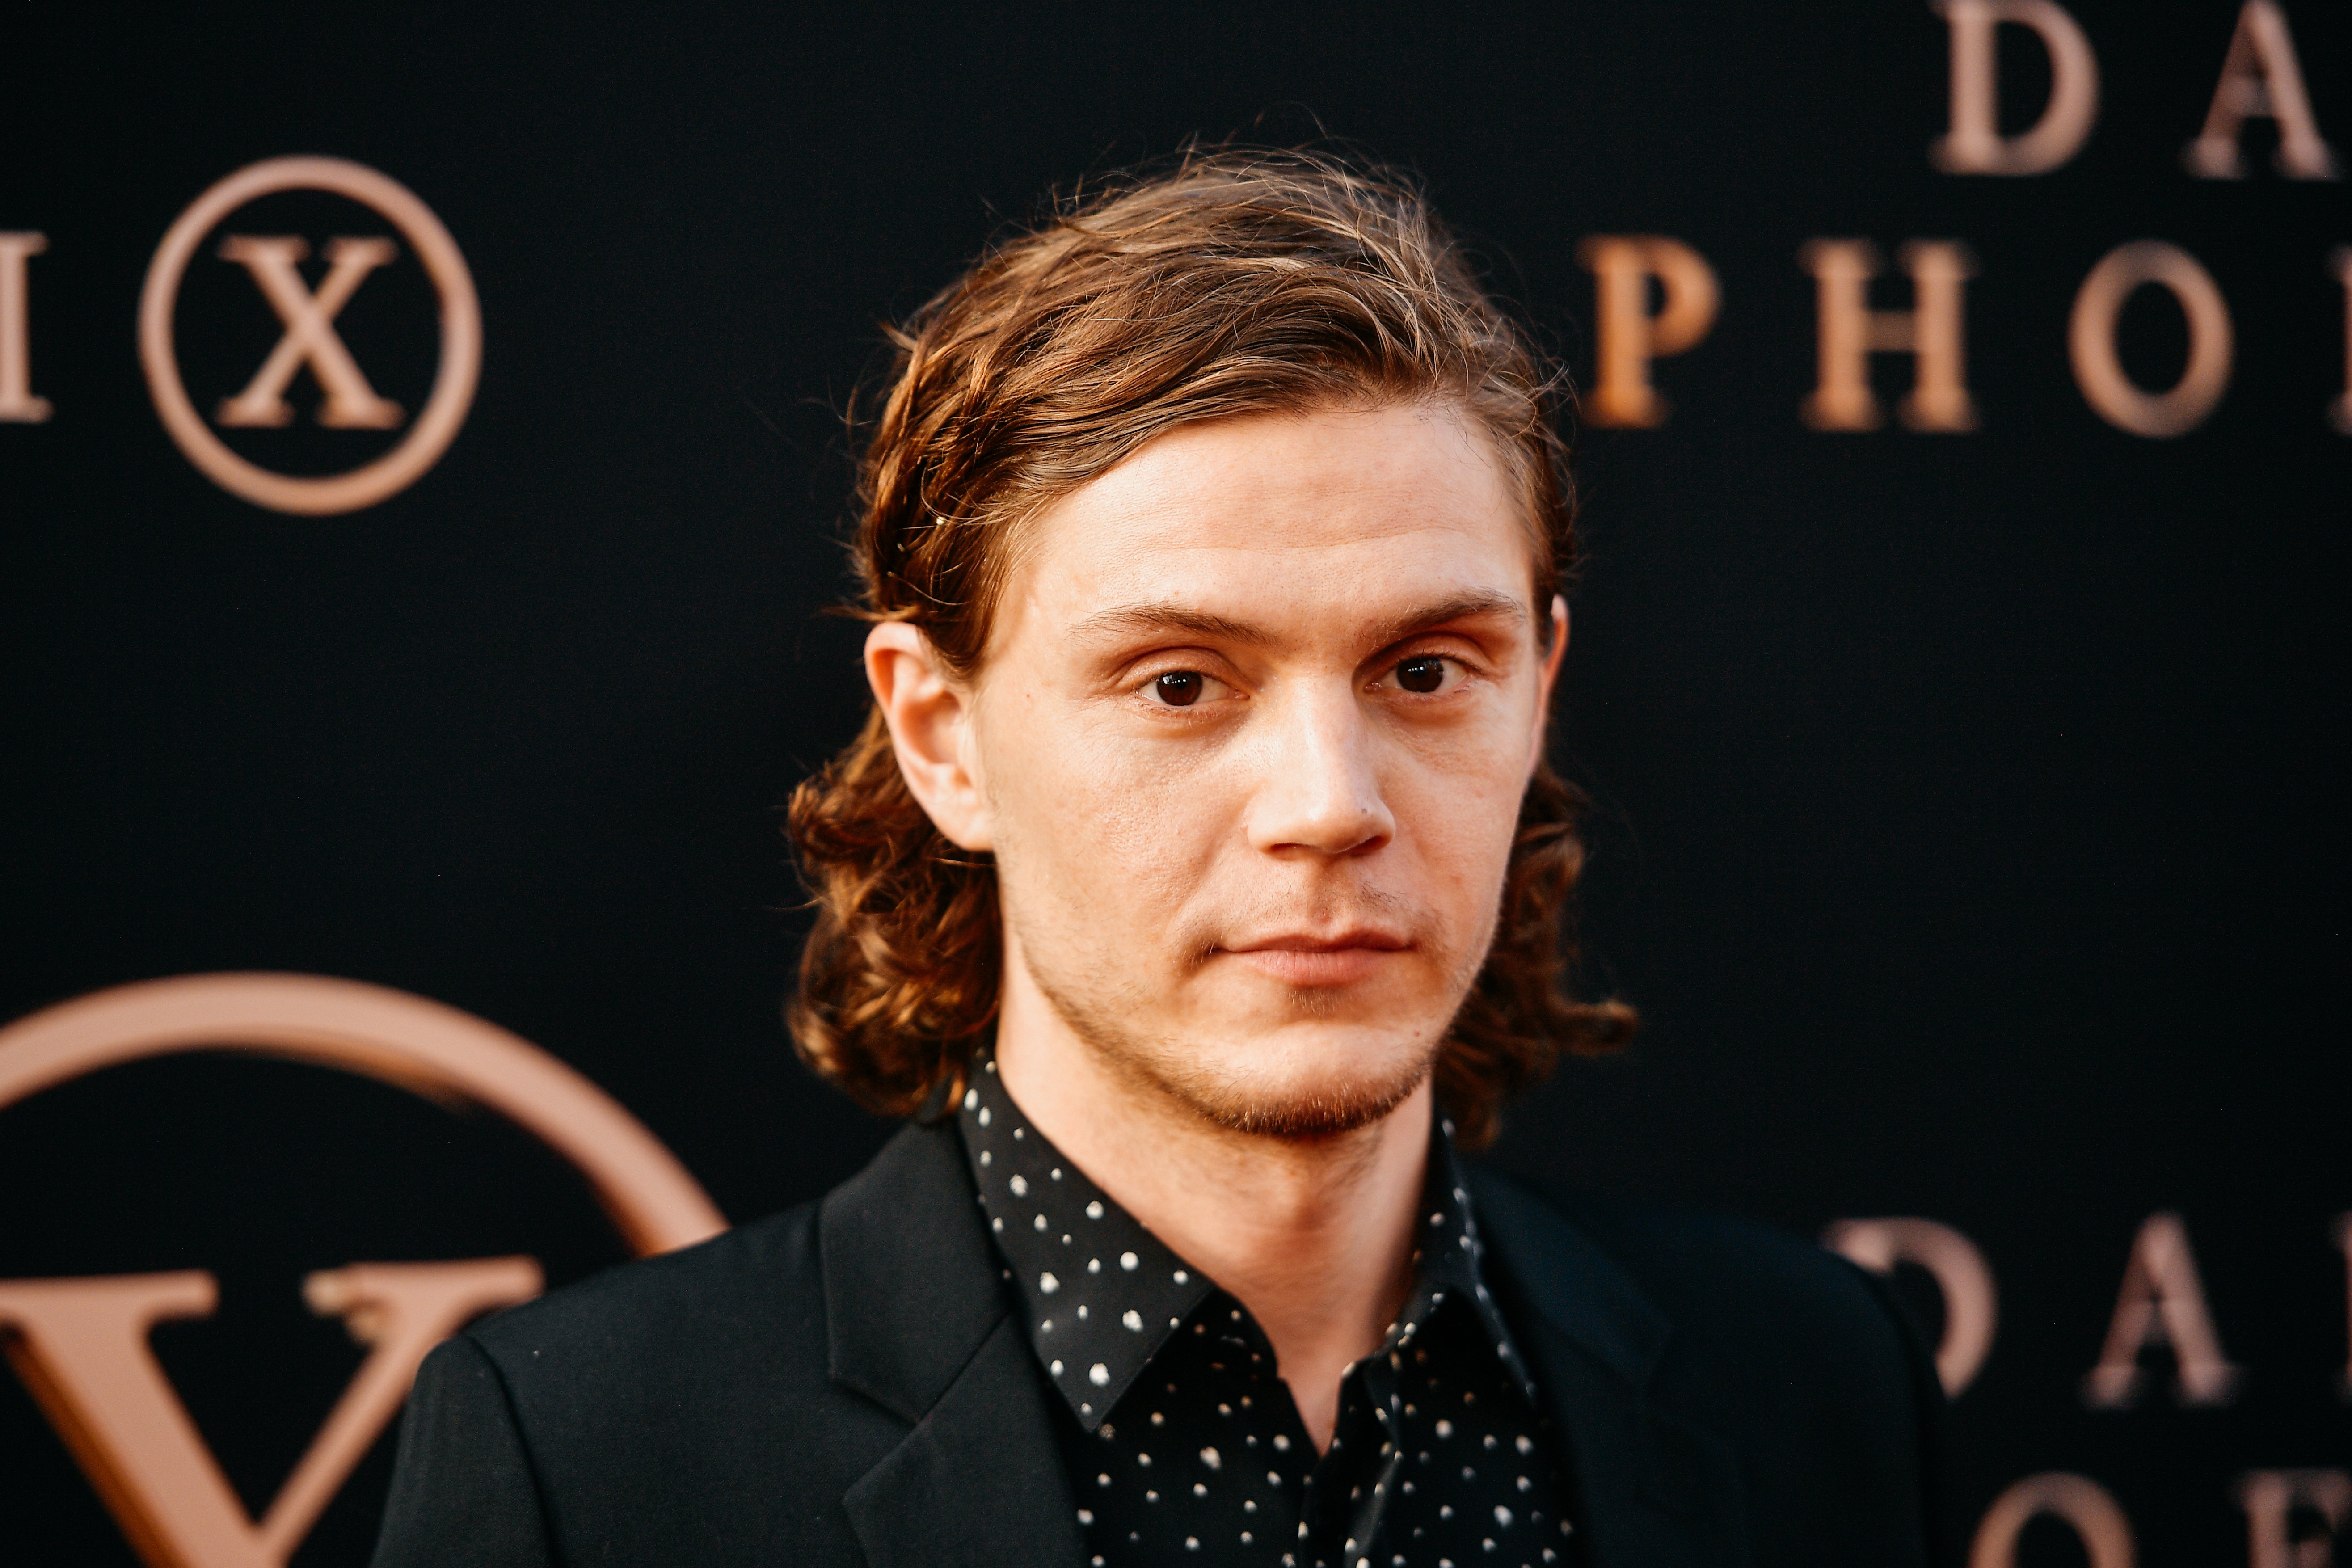 Evan Peters attends the premiere of 20th Century Fox's "Dark Phoenix" on June 04, 2019 in Hollywood, California. | Source: Getty Images